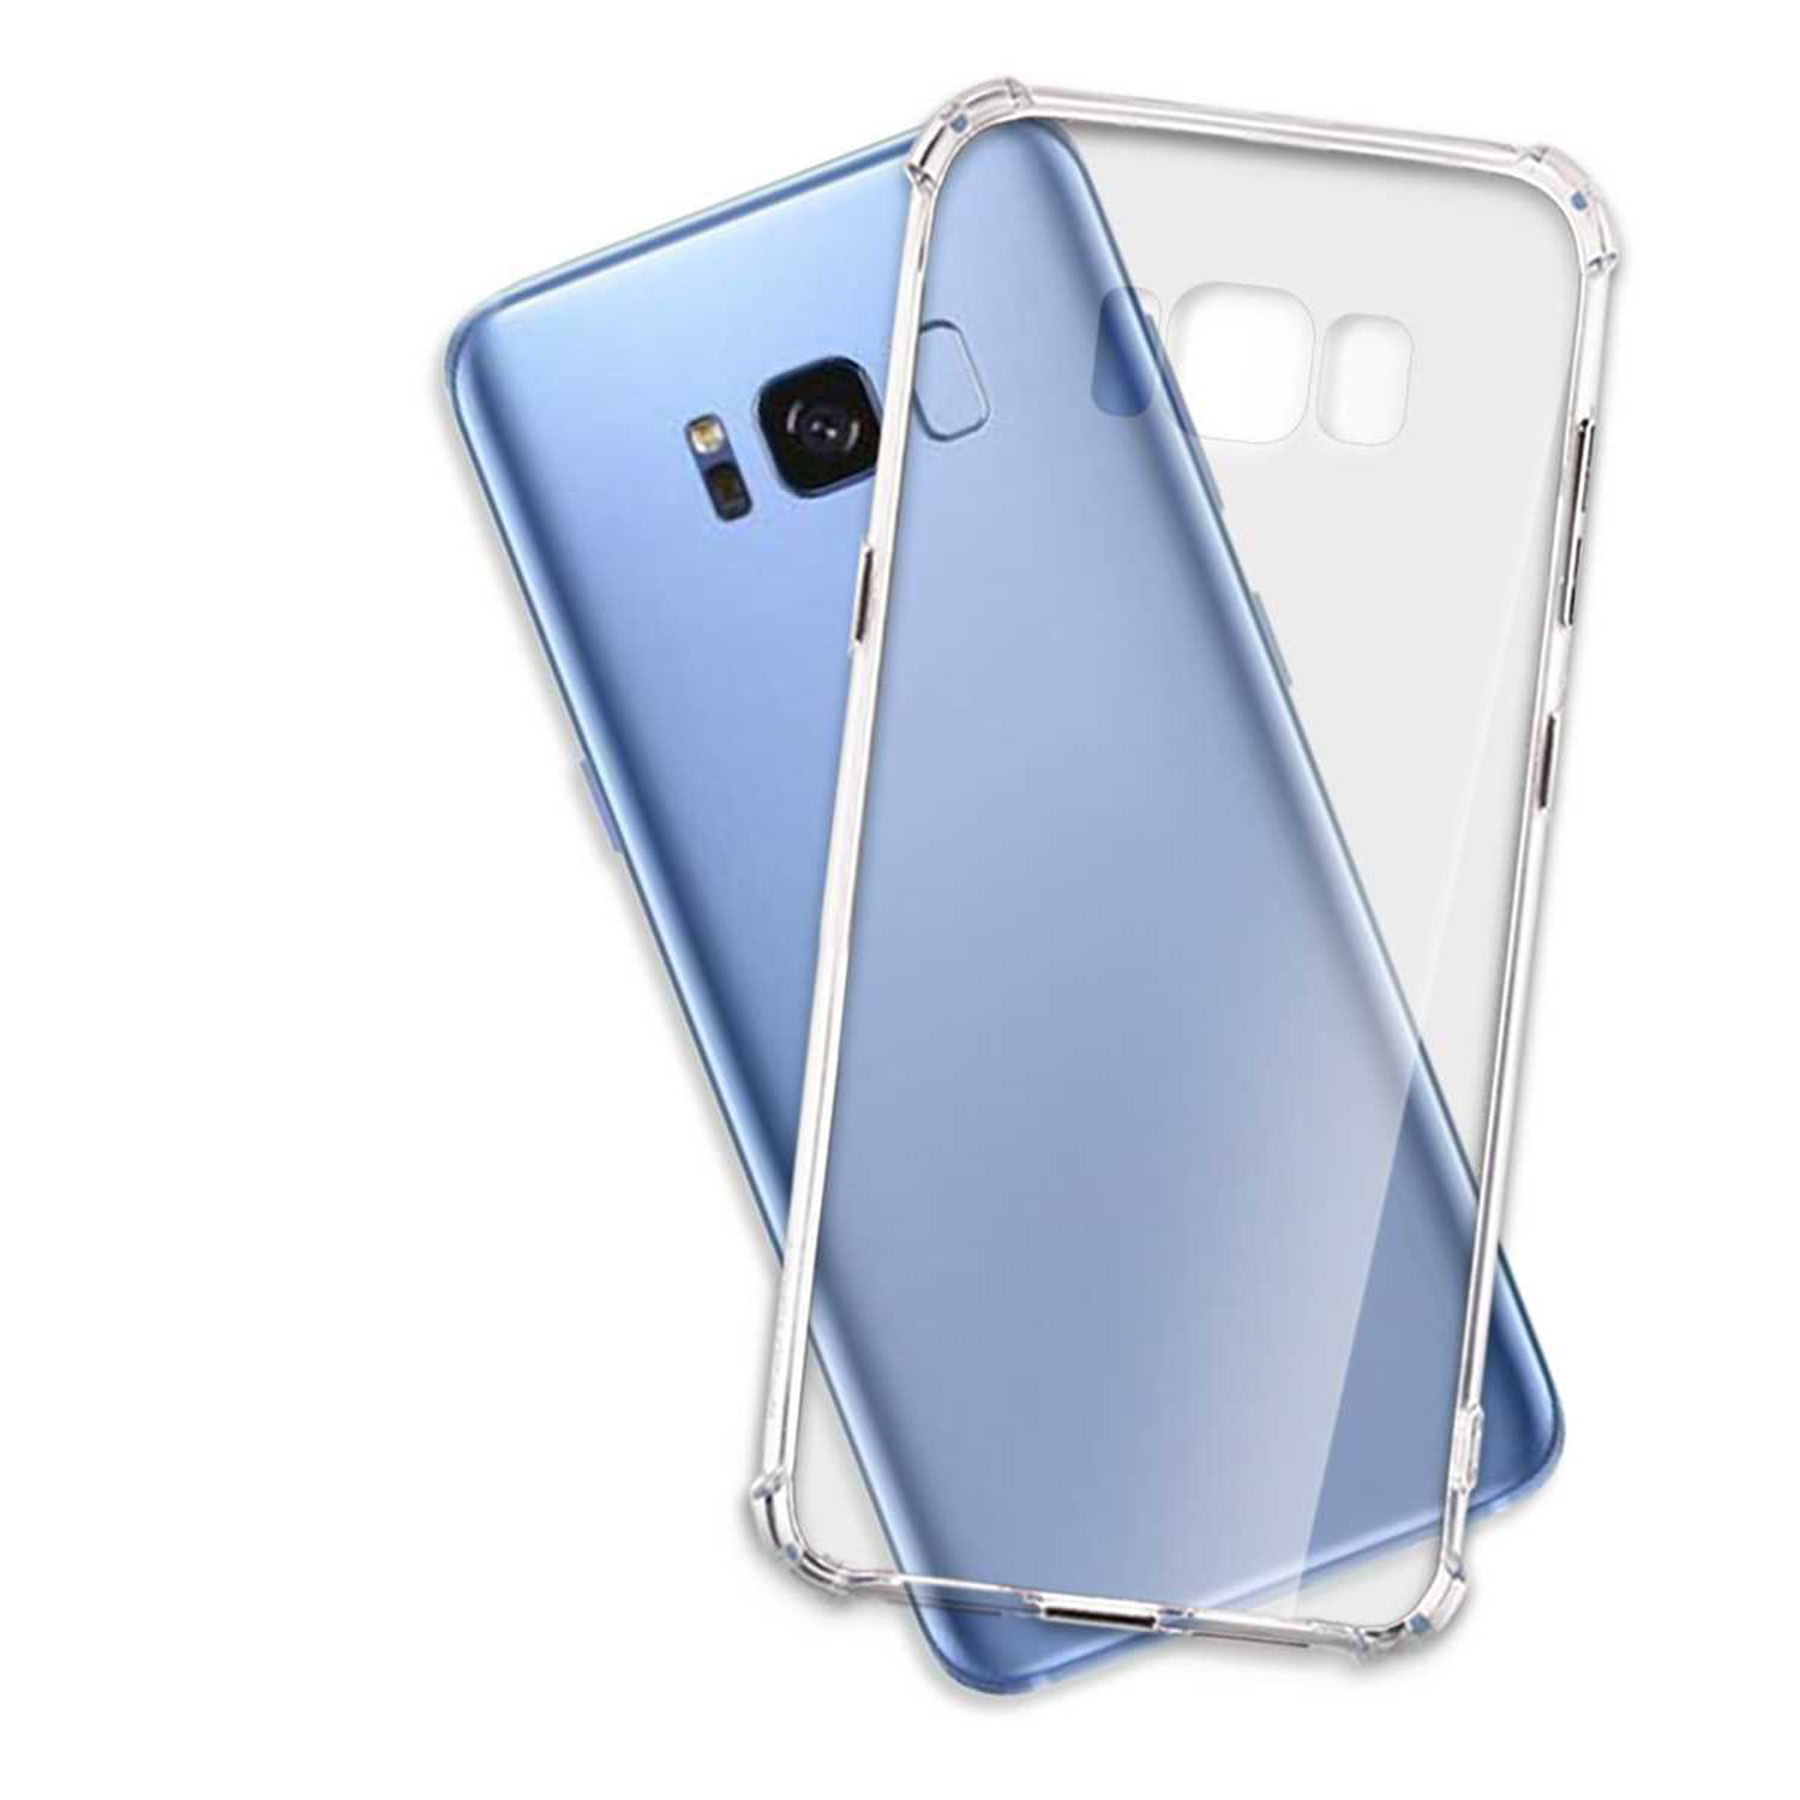 Armor MTB Clear S8, MORE Case, Transparent ENERGY Galaxy Samsung, Backcover,